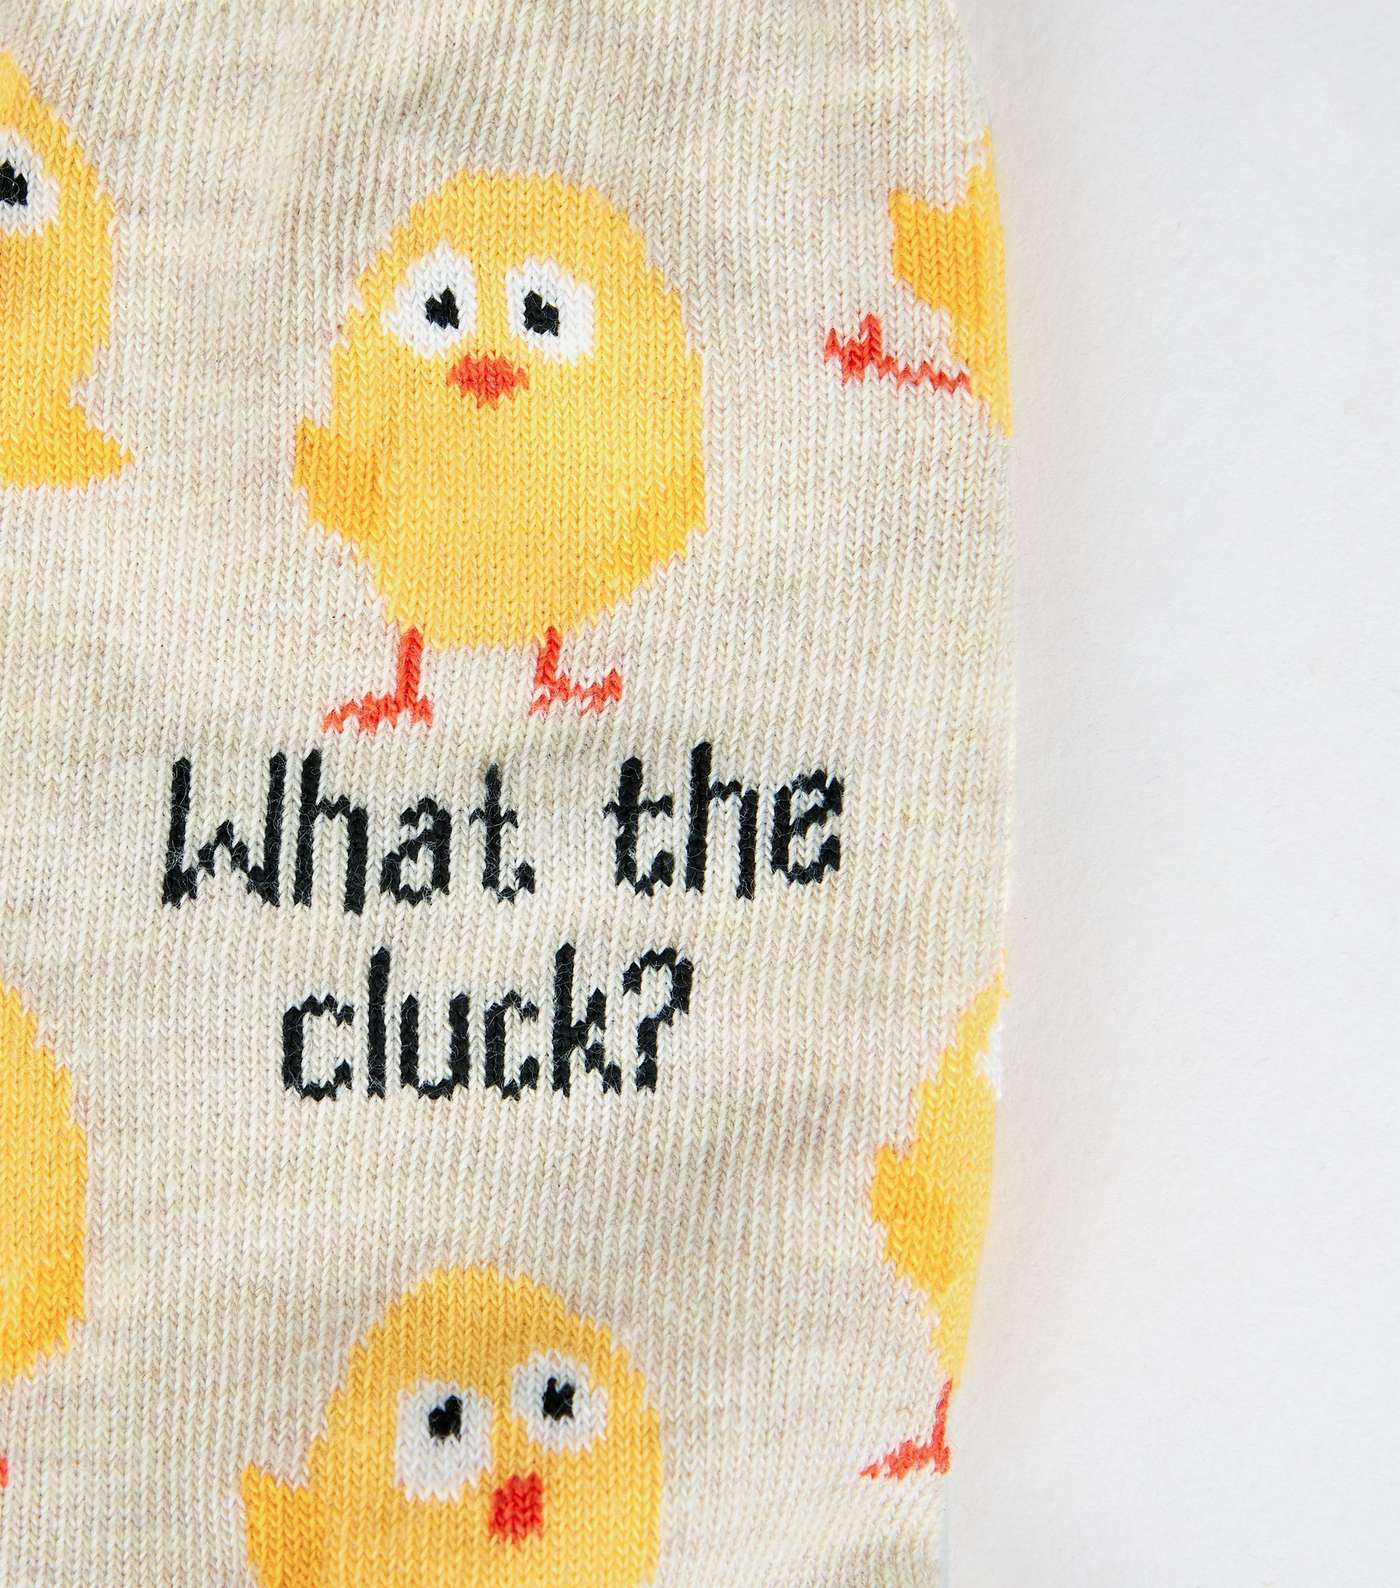 Stone Chick Print What The Cluck Slogan Socks Image 3